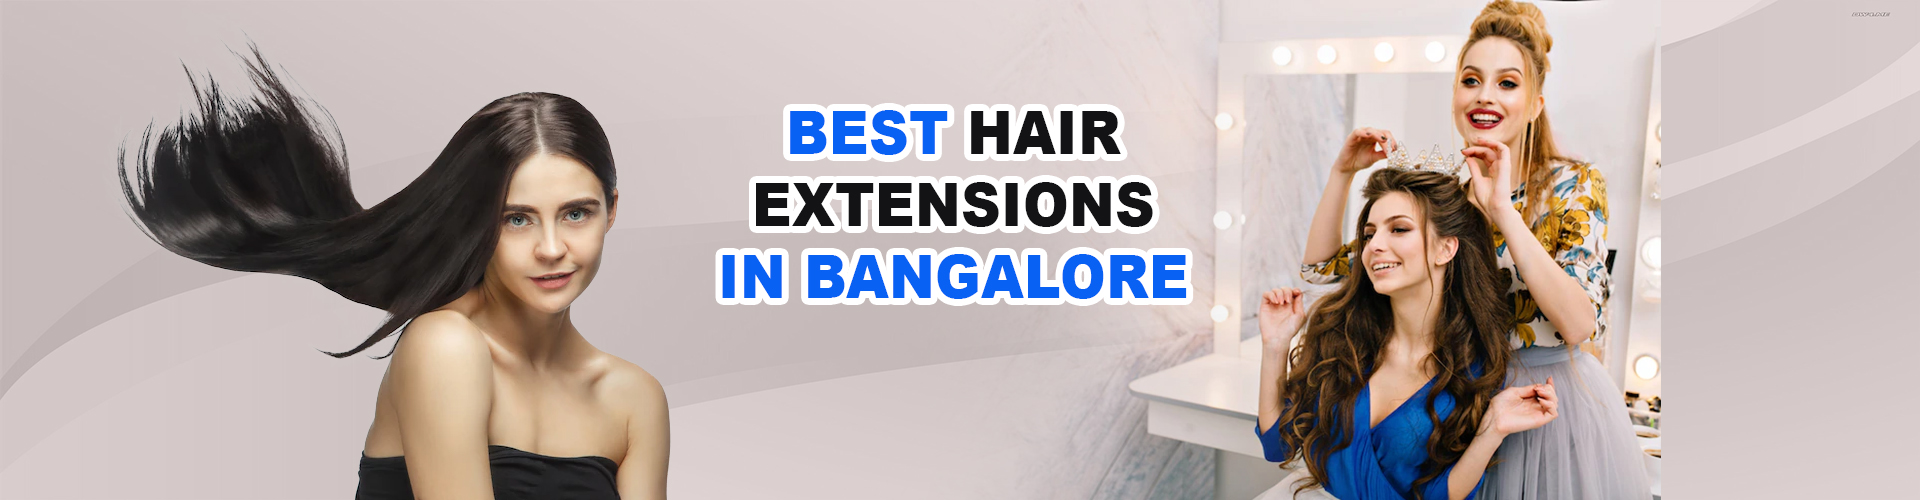 The Best Hair Styling Services in Bengaluru